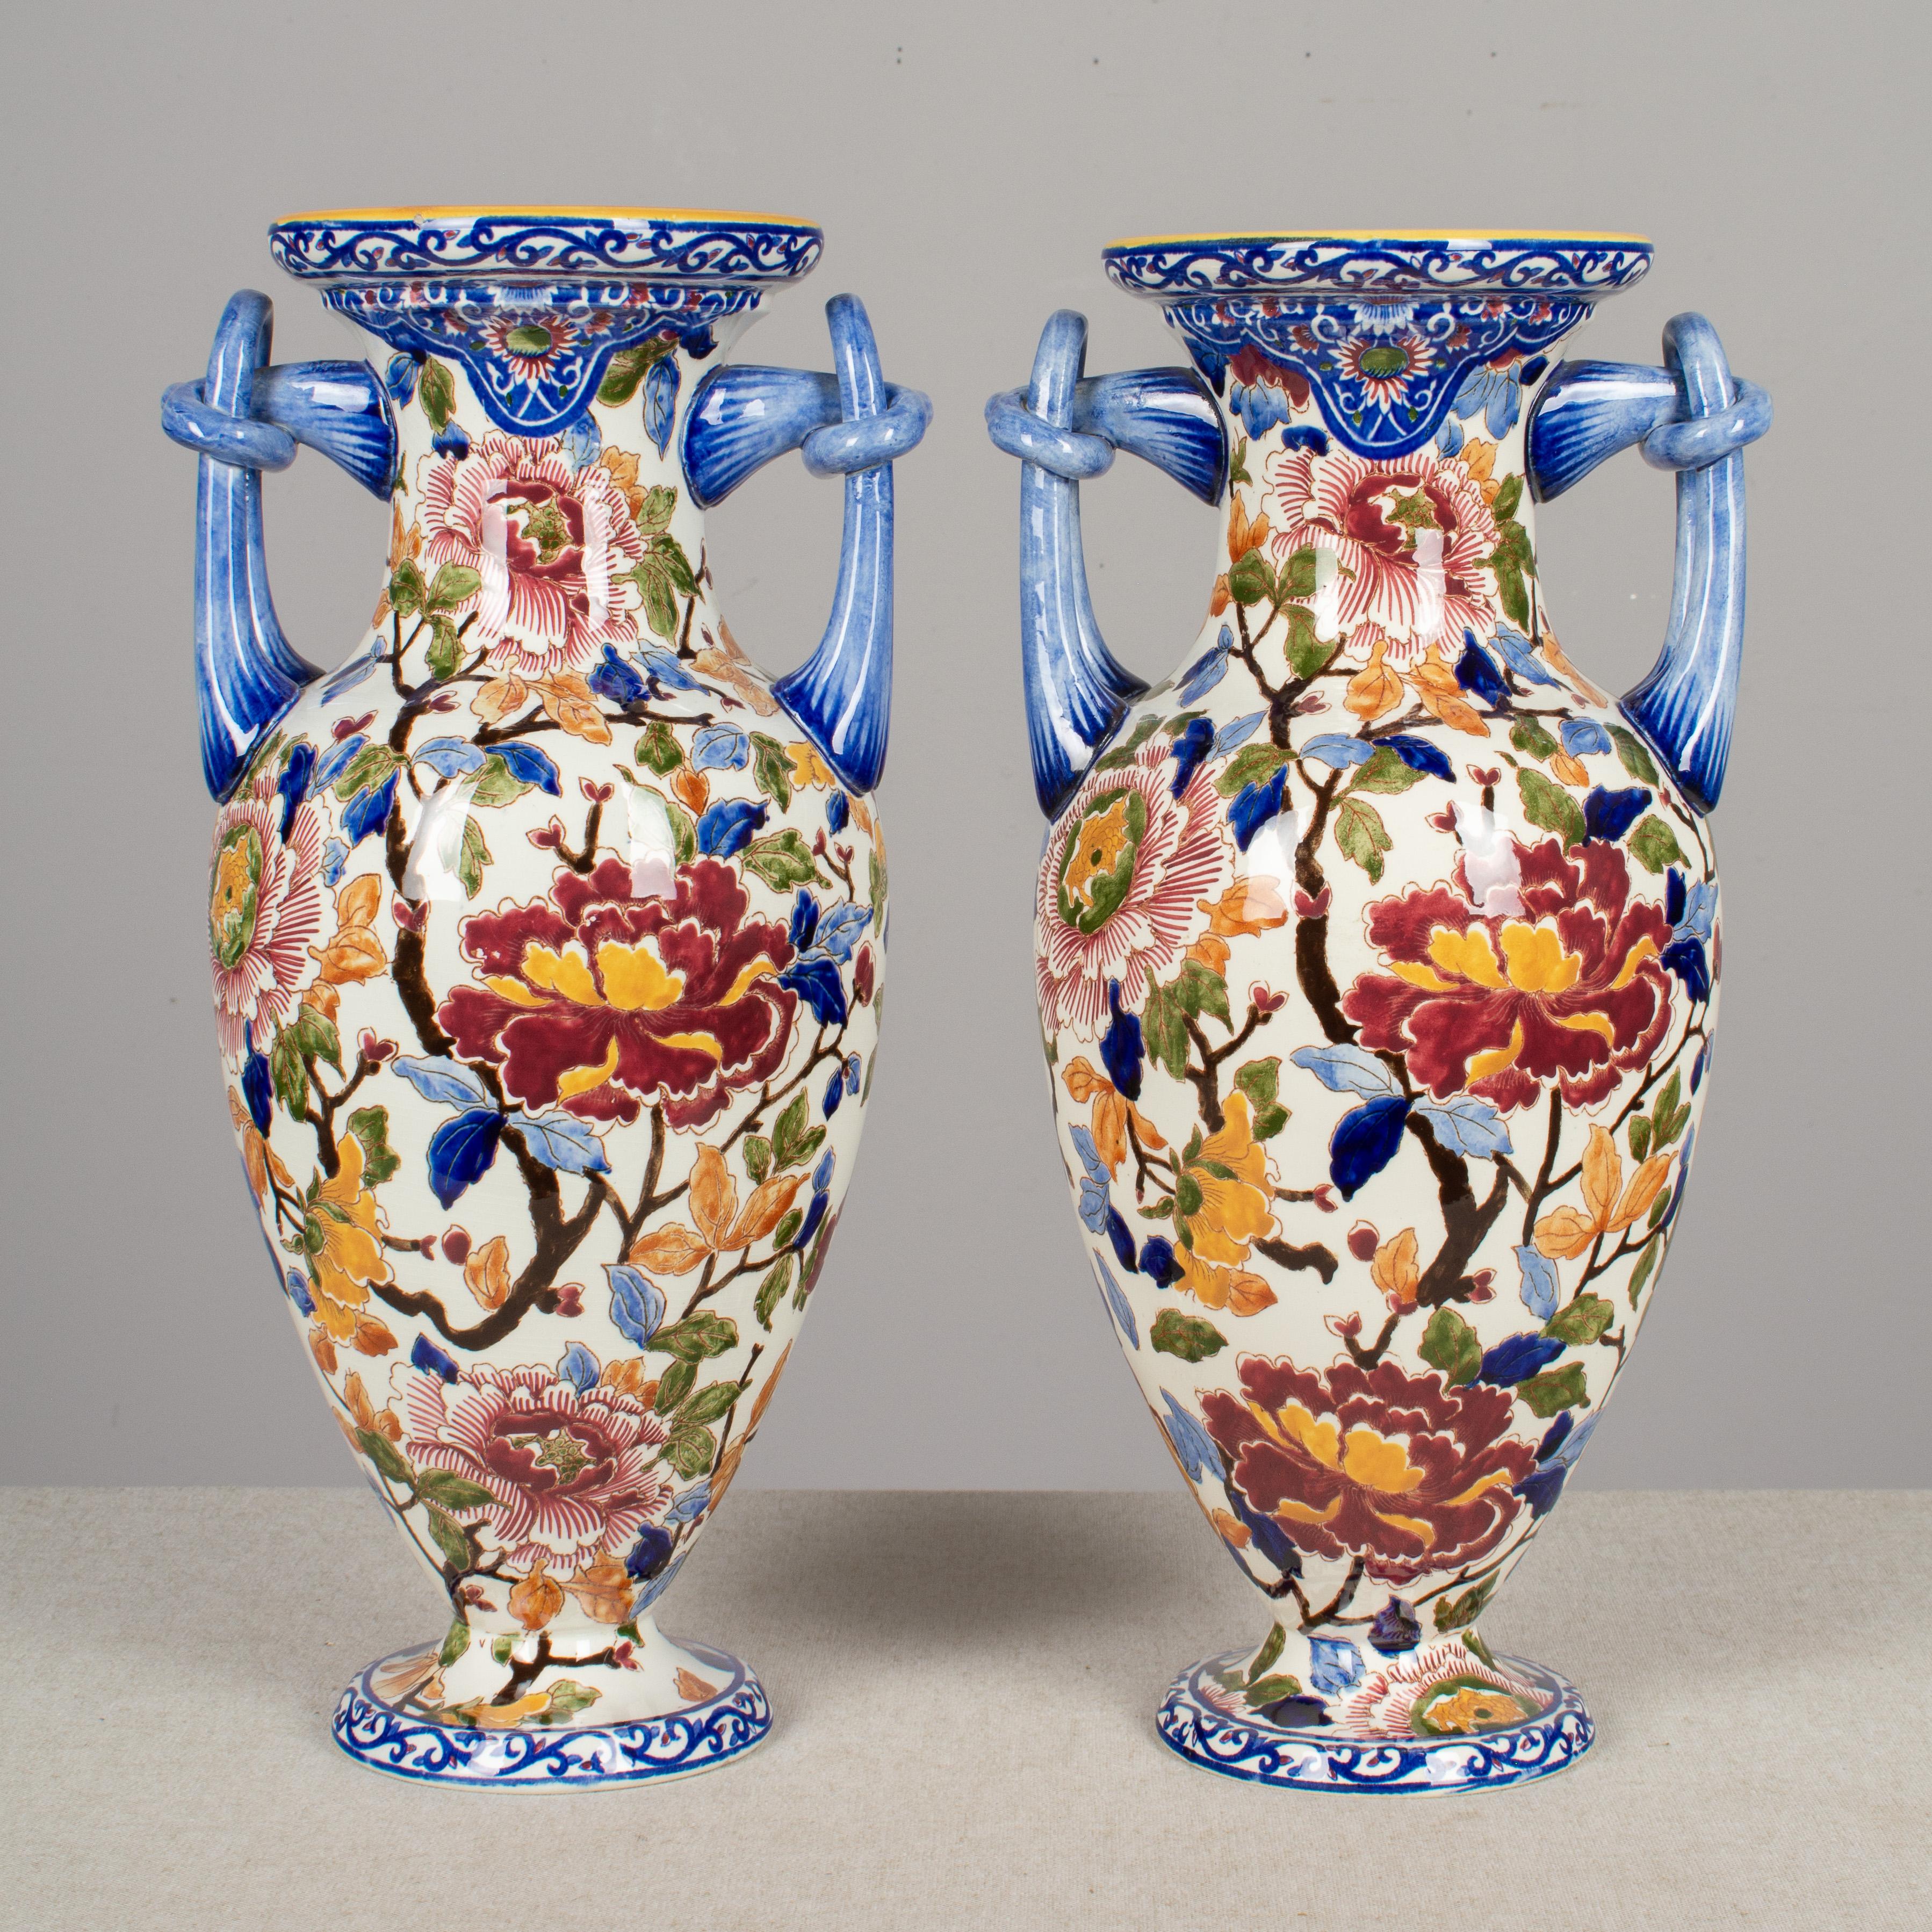 A superb pair of faience French vases from Gien with hand-painted floral pattern in bold vivid colors. Flared baluster shape with blue double handles. Marked on the underside. Overall: 15.5